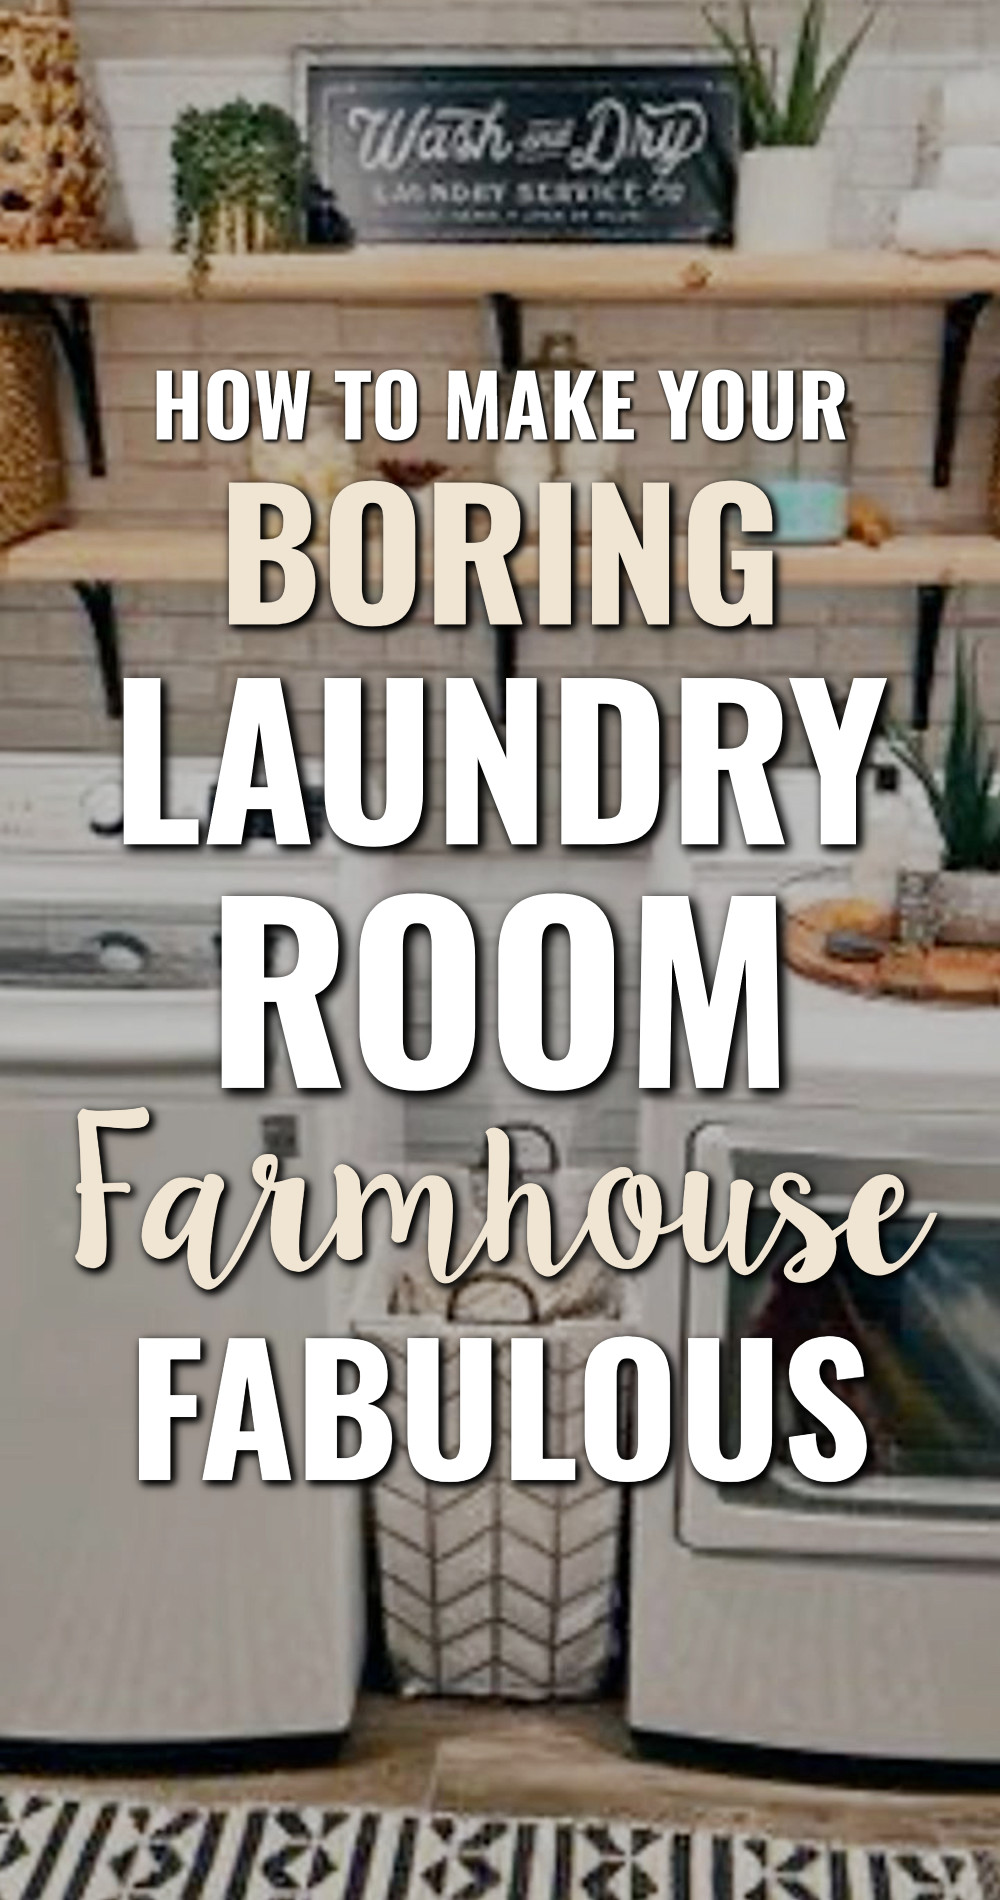 How to make your boring laundry room farmhouse fabulous